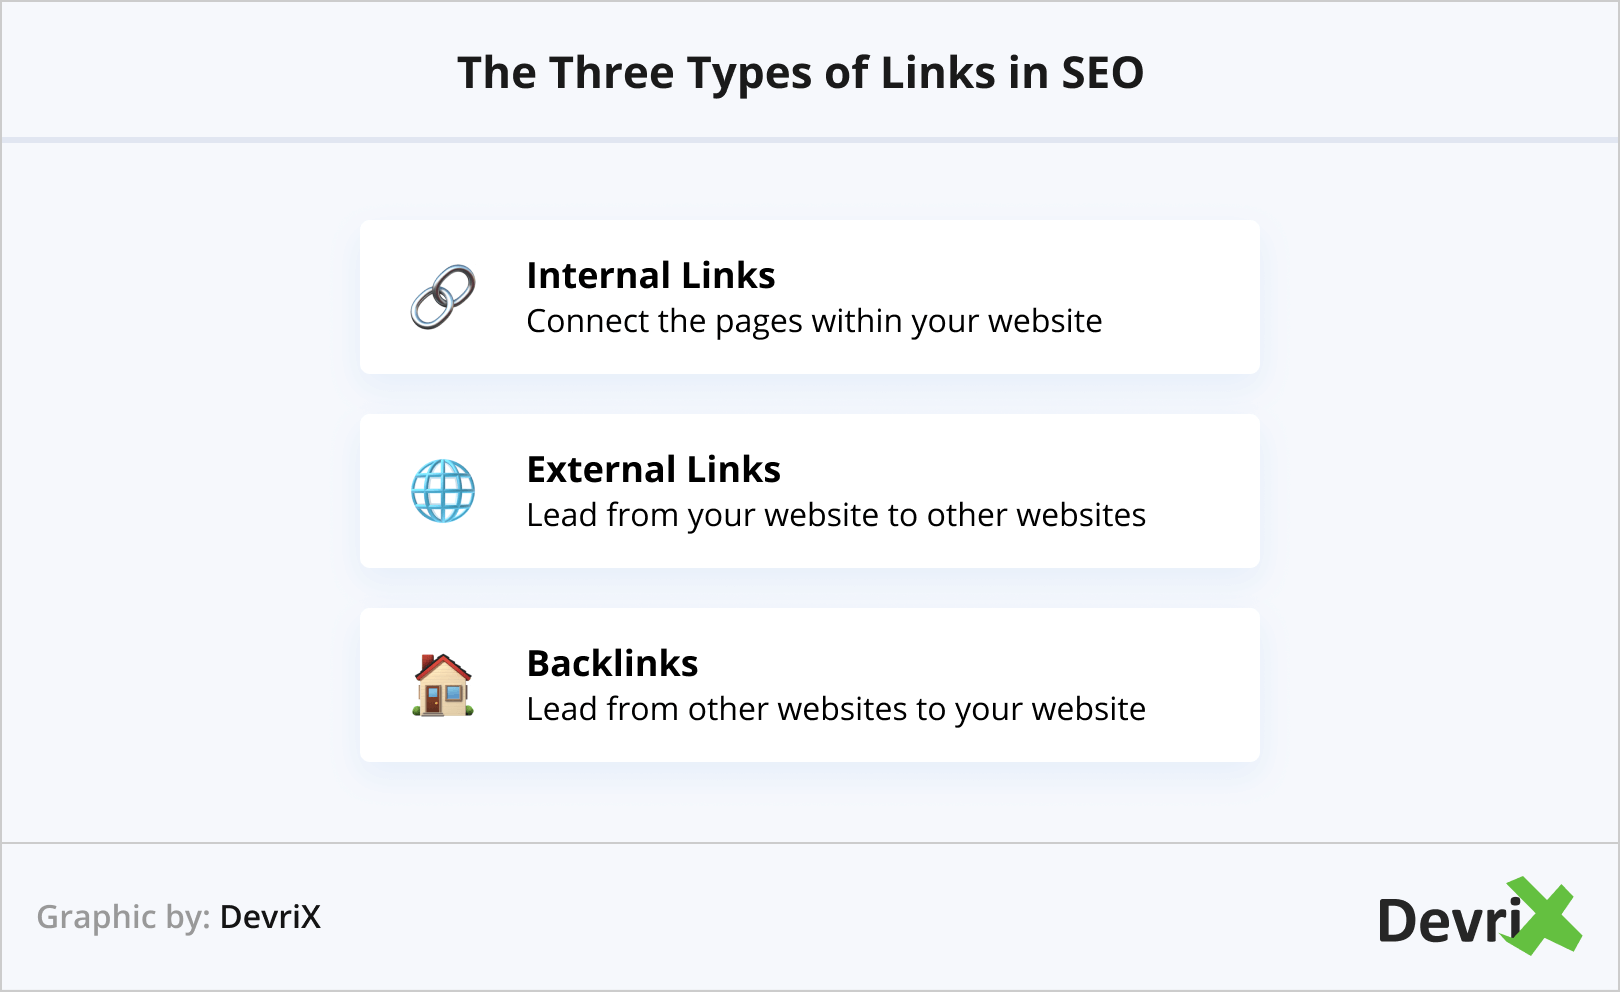 The Three Types of Links in SEO